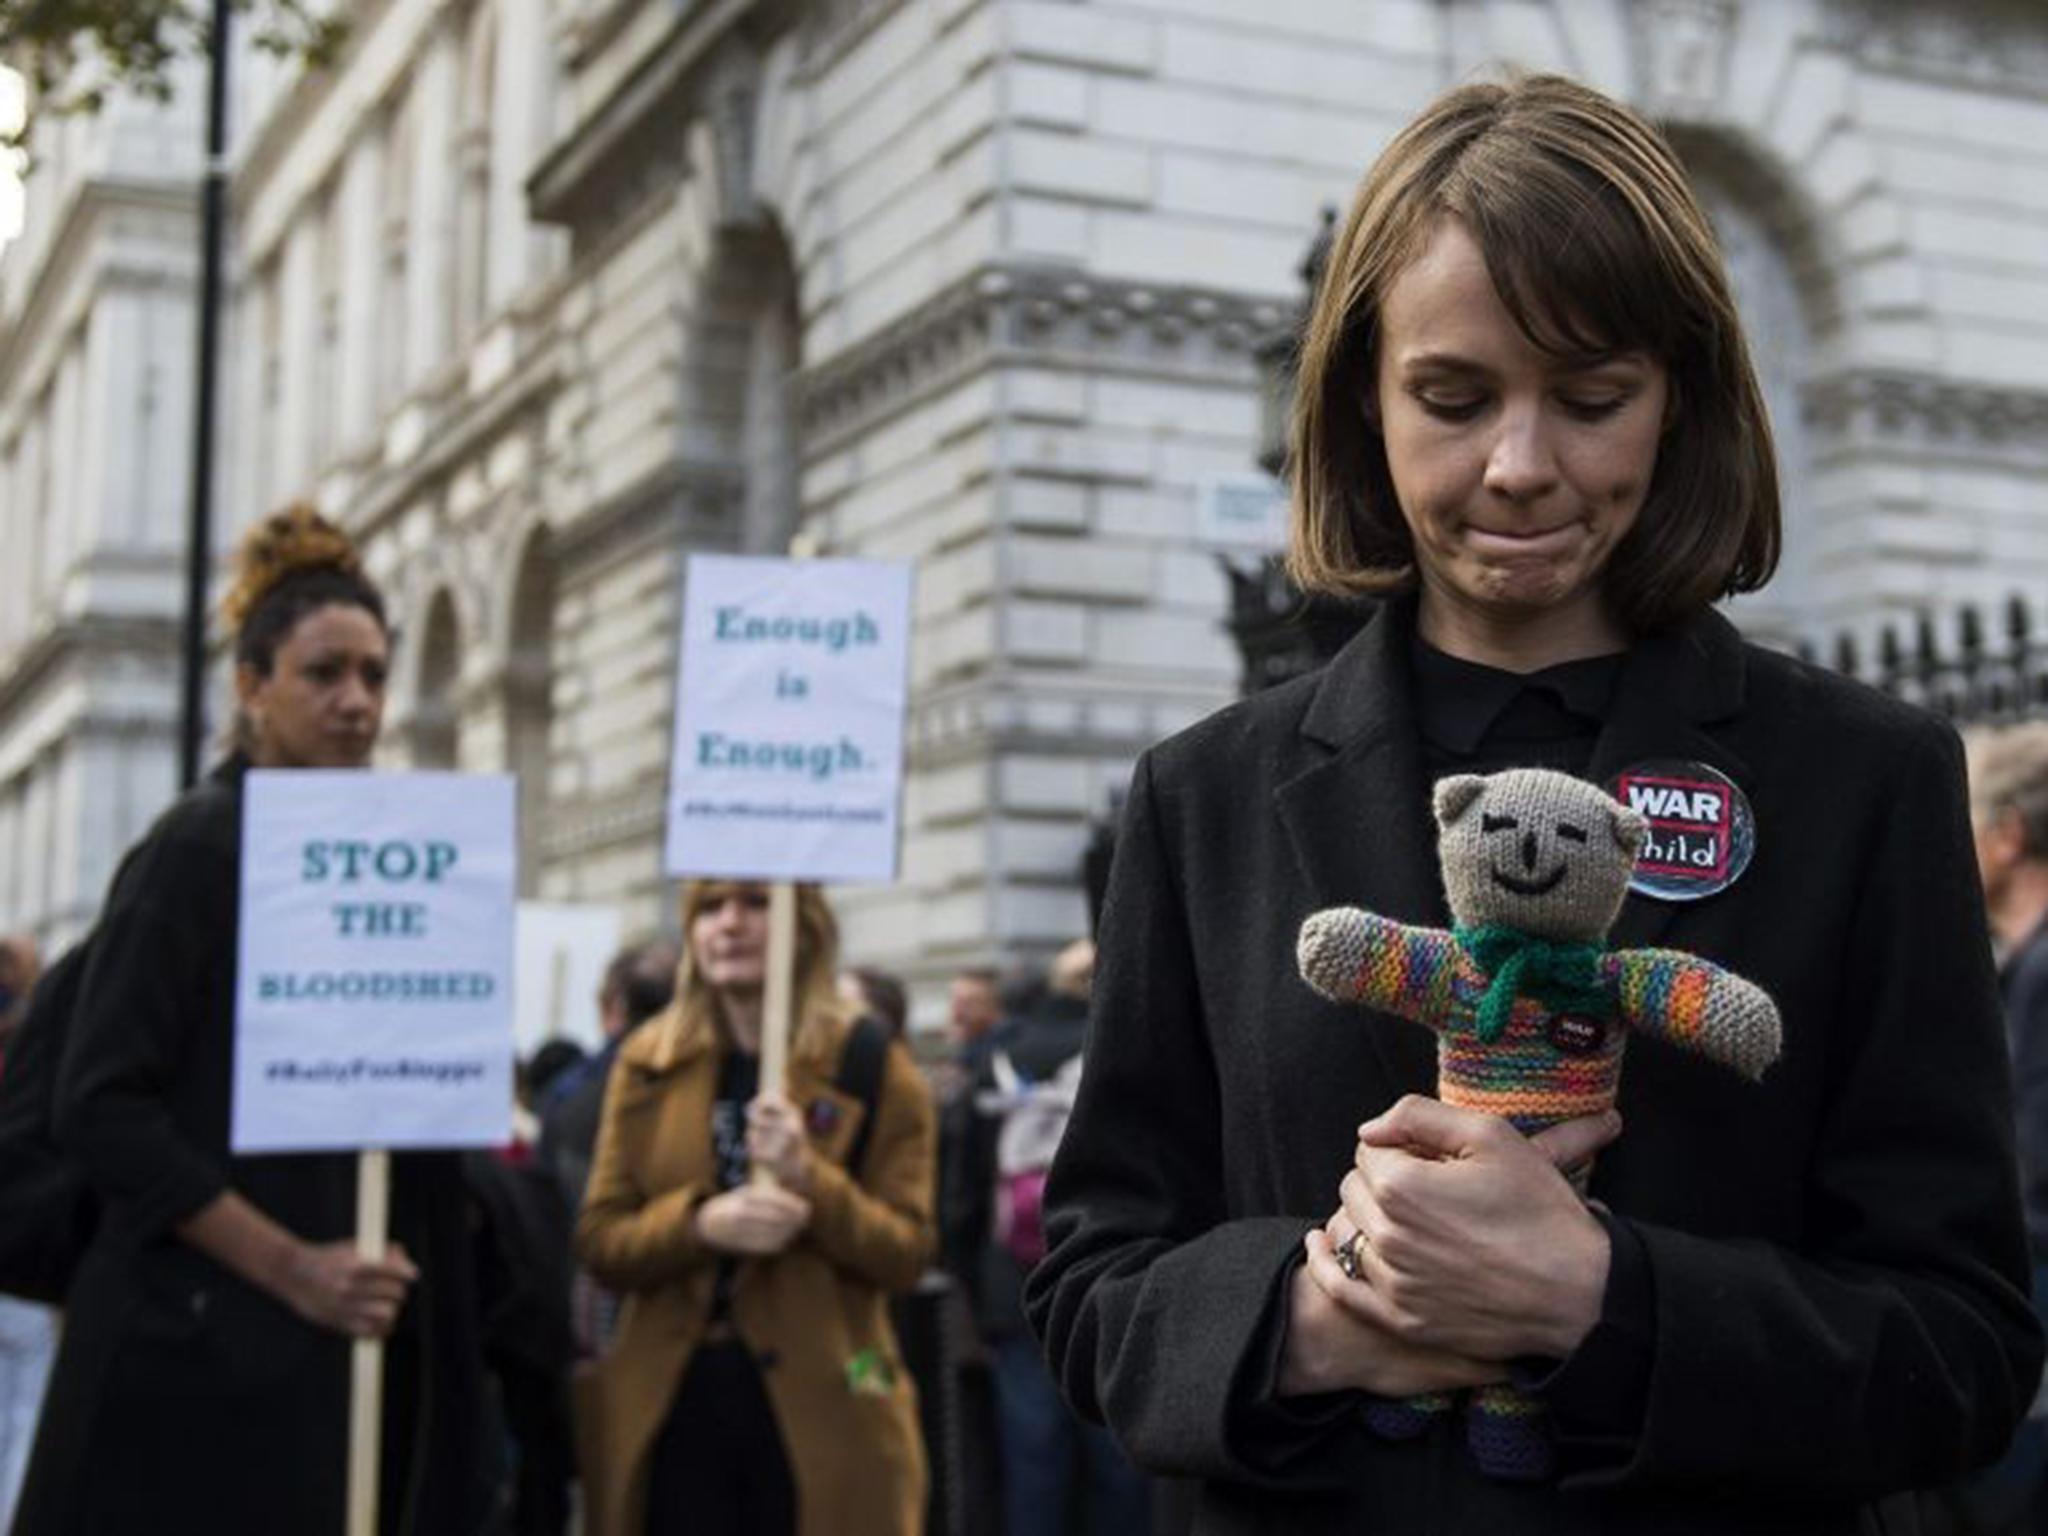 Mulligan joins protesters outside Downing Street